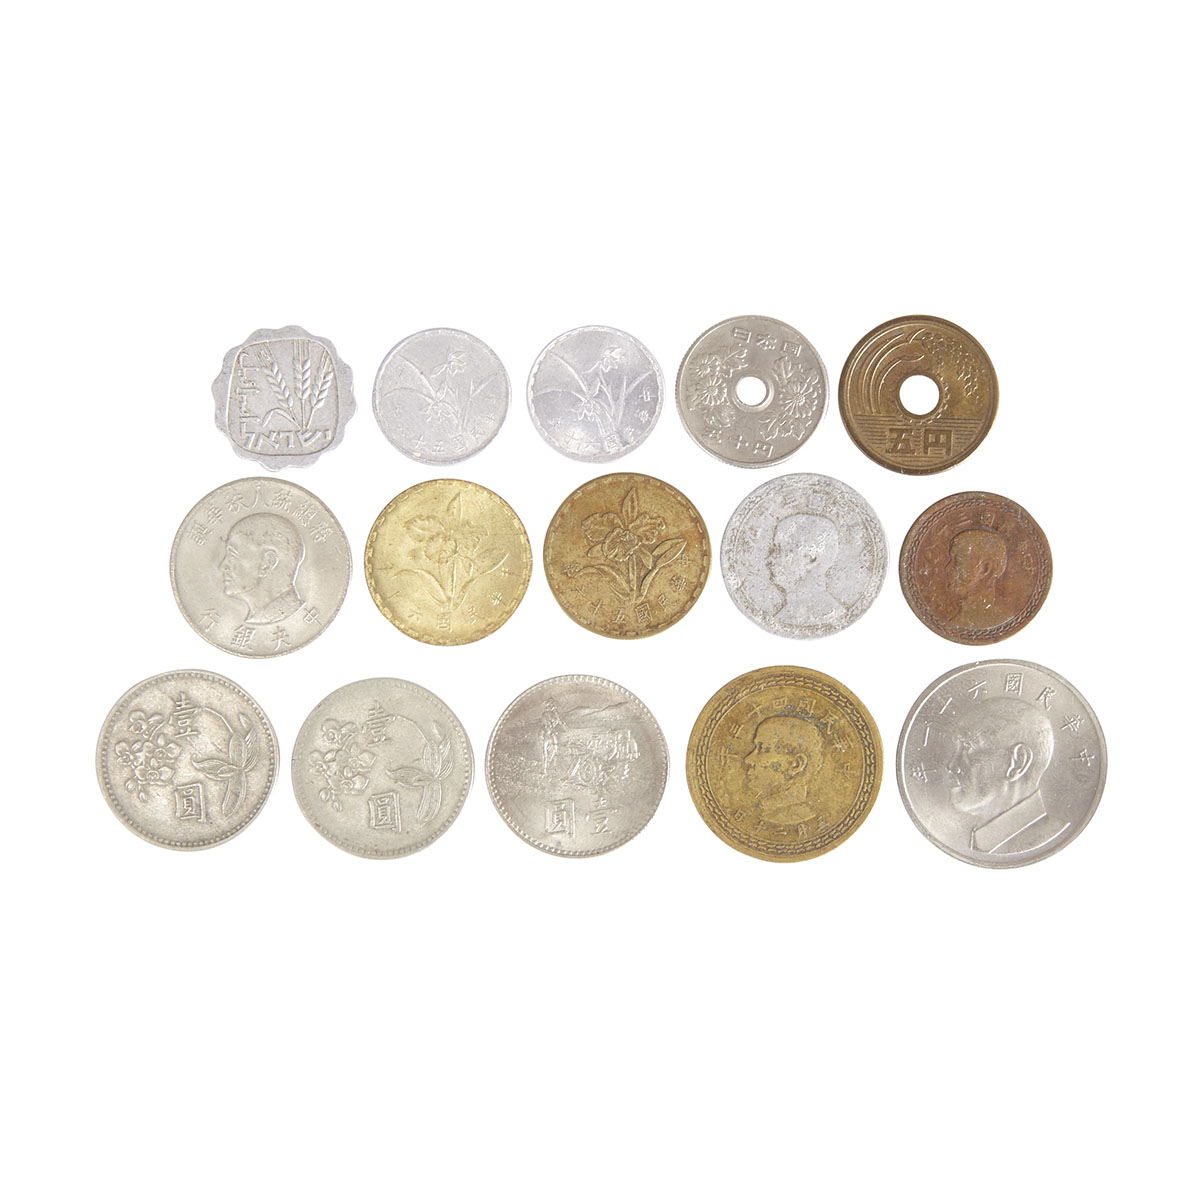 Republic of China, Formosa and Japanese Coins, Early to Mid 20th Century